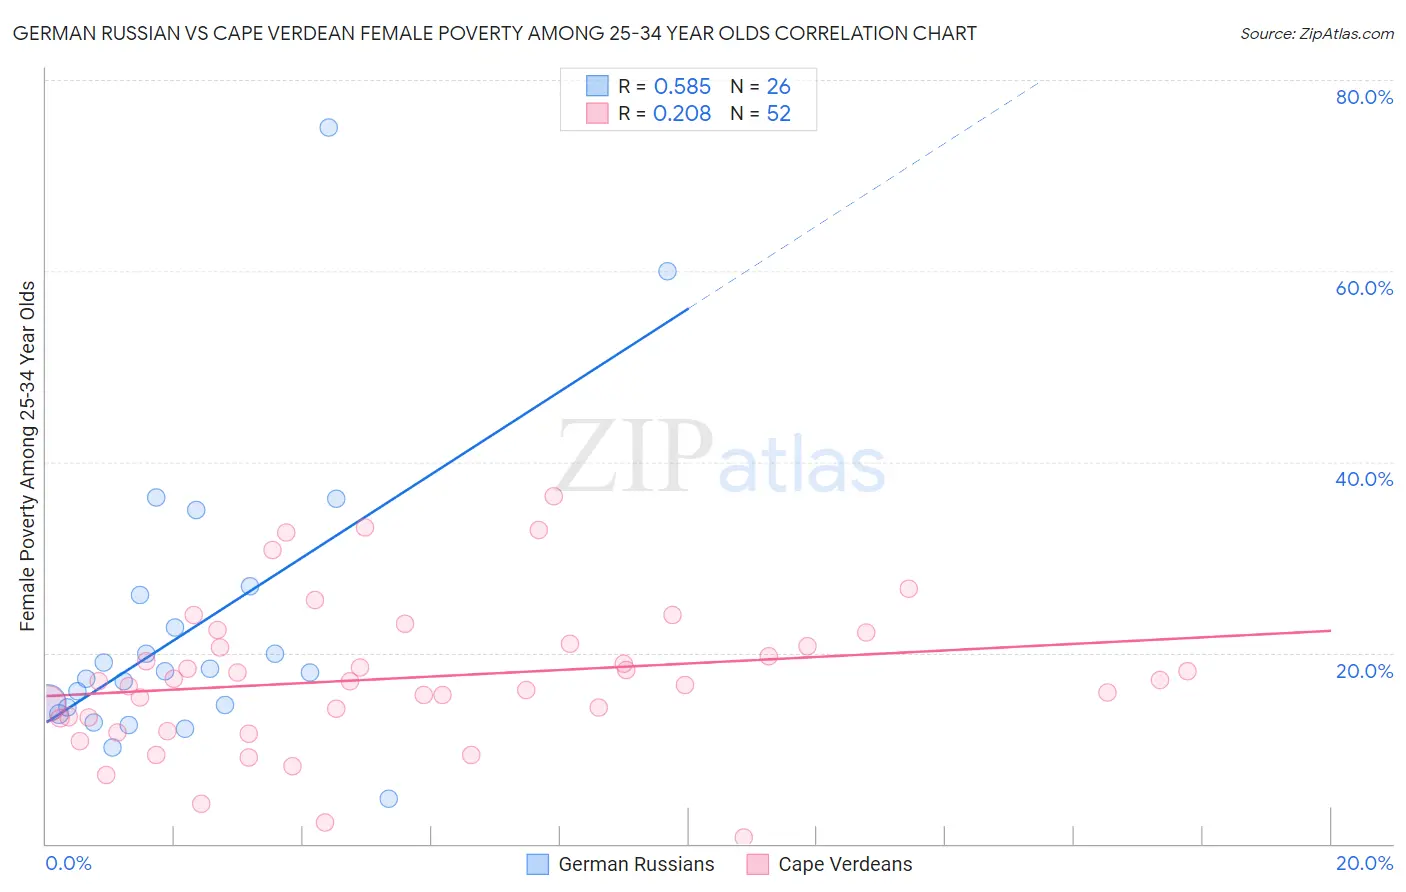 German Russian vs Cape Verdean Female Poverty Among 25-34 Year Olds